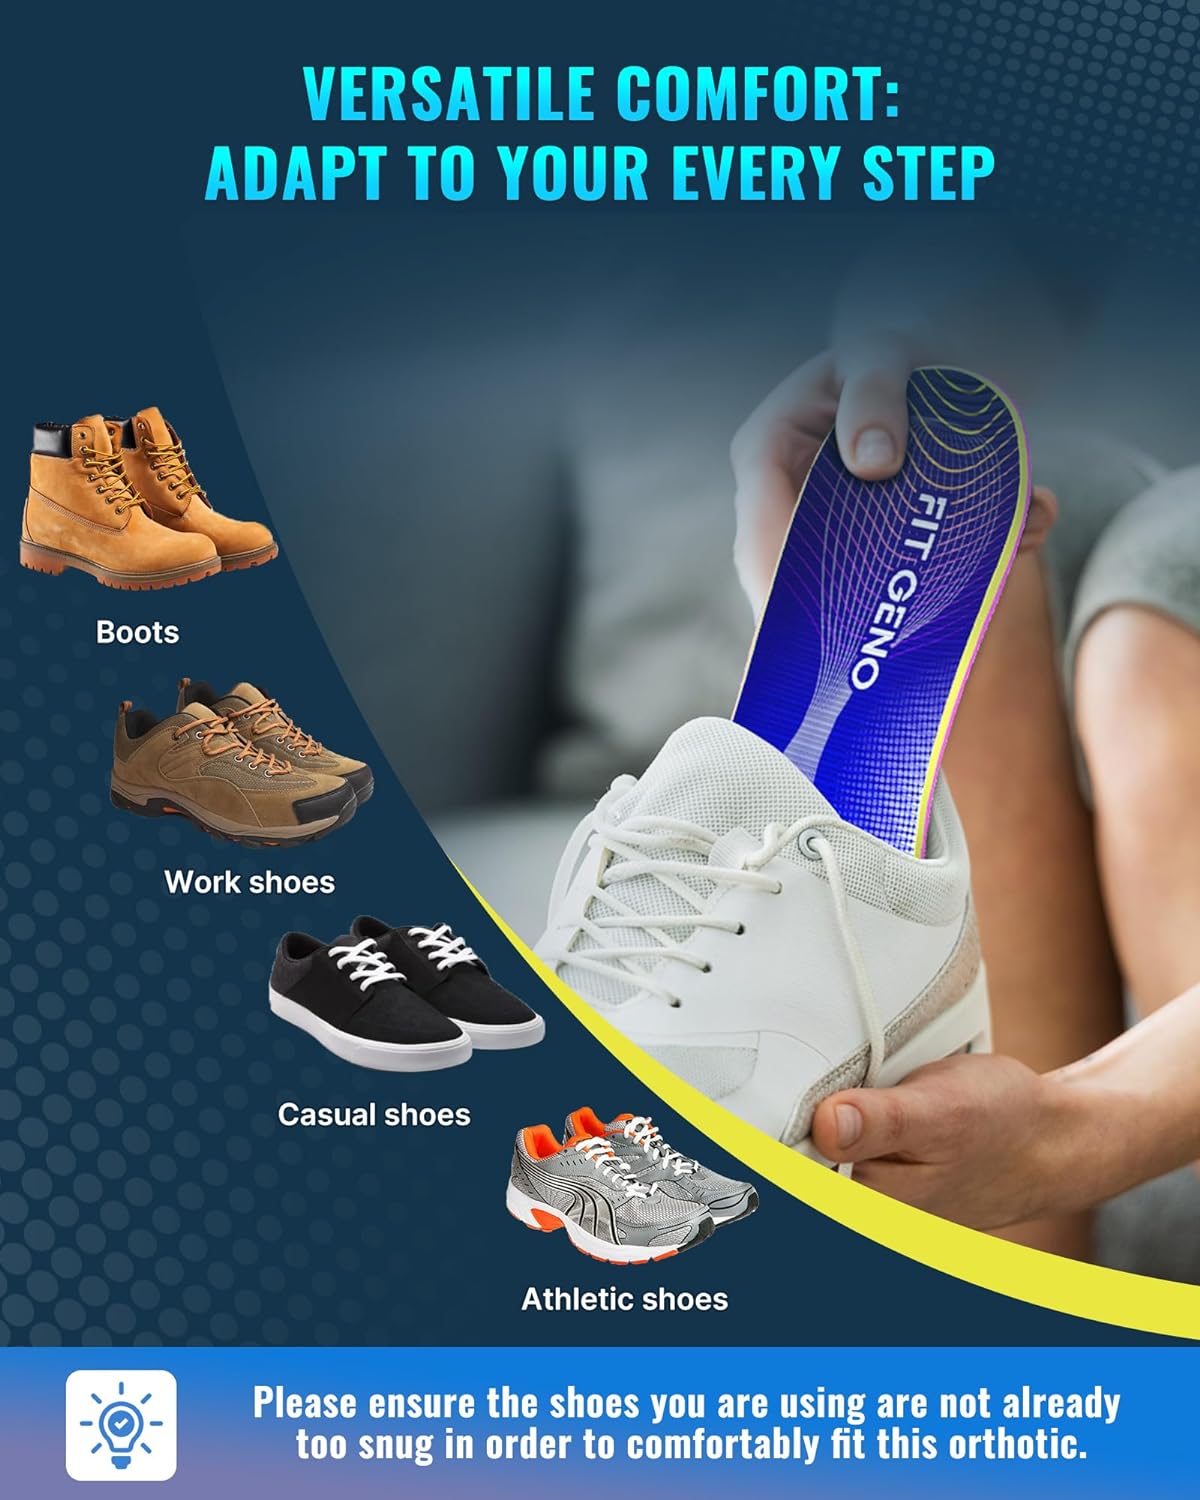 Plantar Fasciitis Arch Support Insoles: Heavy Duty Arch Support Inserts for Women  Men 220lbs+ - Heel Arch  Ball of Foot Pain Relif Shoe Orthotics for Flat Feet  High Arch Work Boots Sneakers